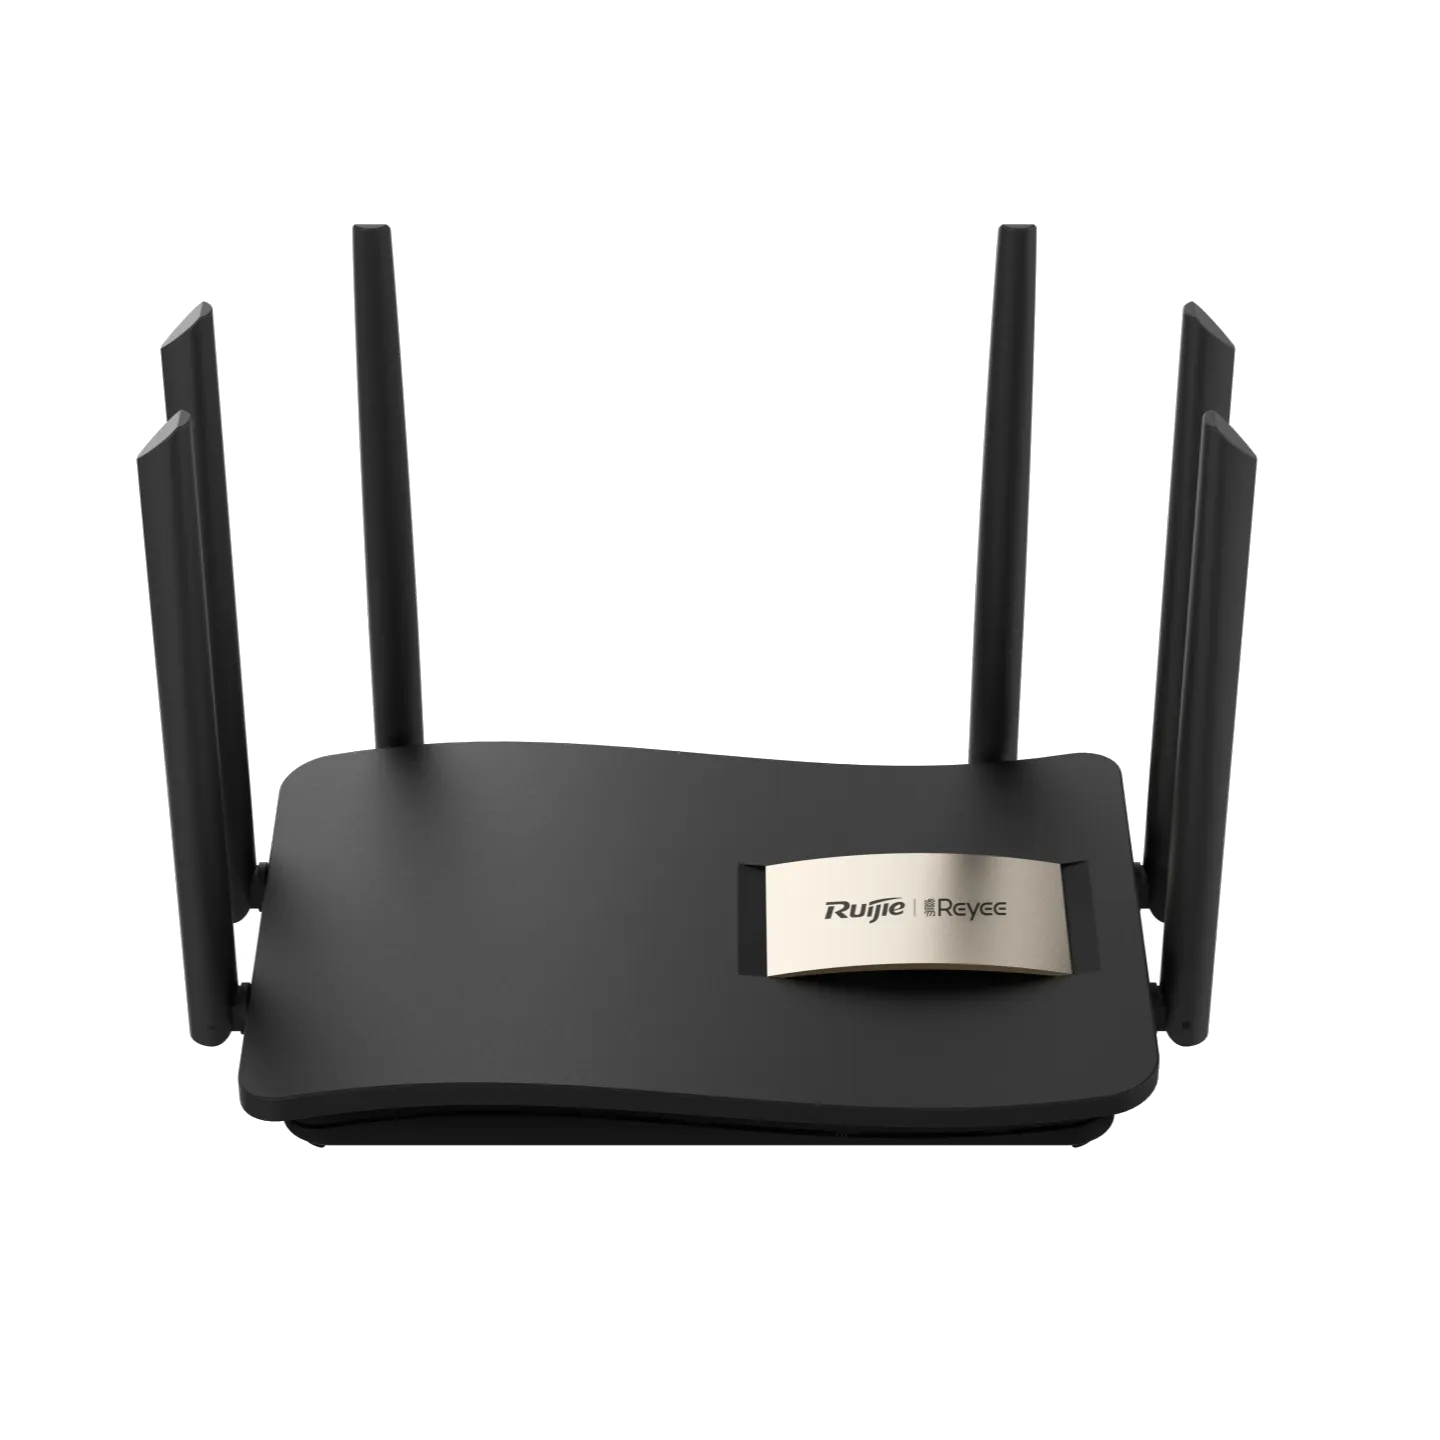 1300M DUAL-BAND GIGABIT WIRELESS HOME ROUTER